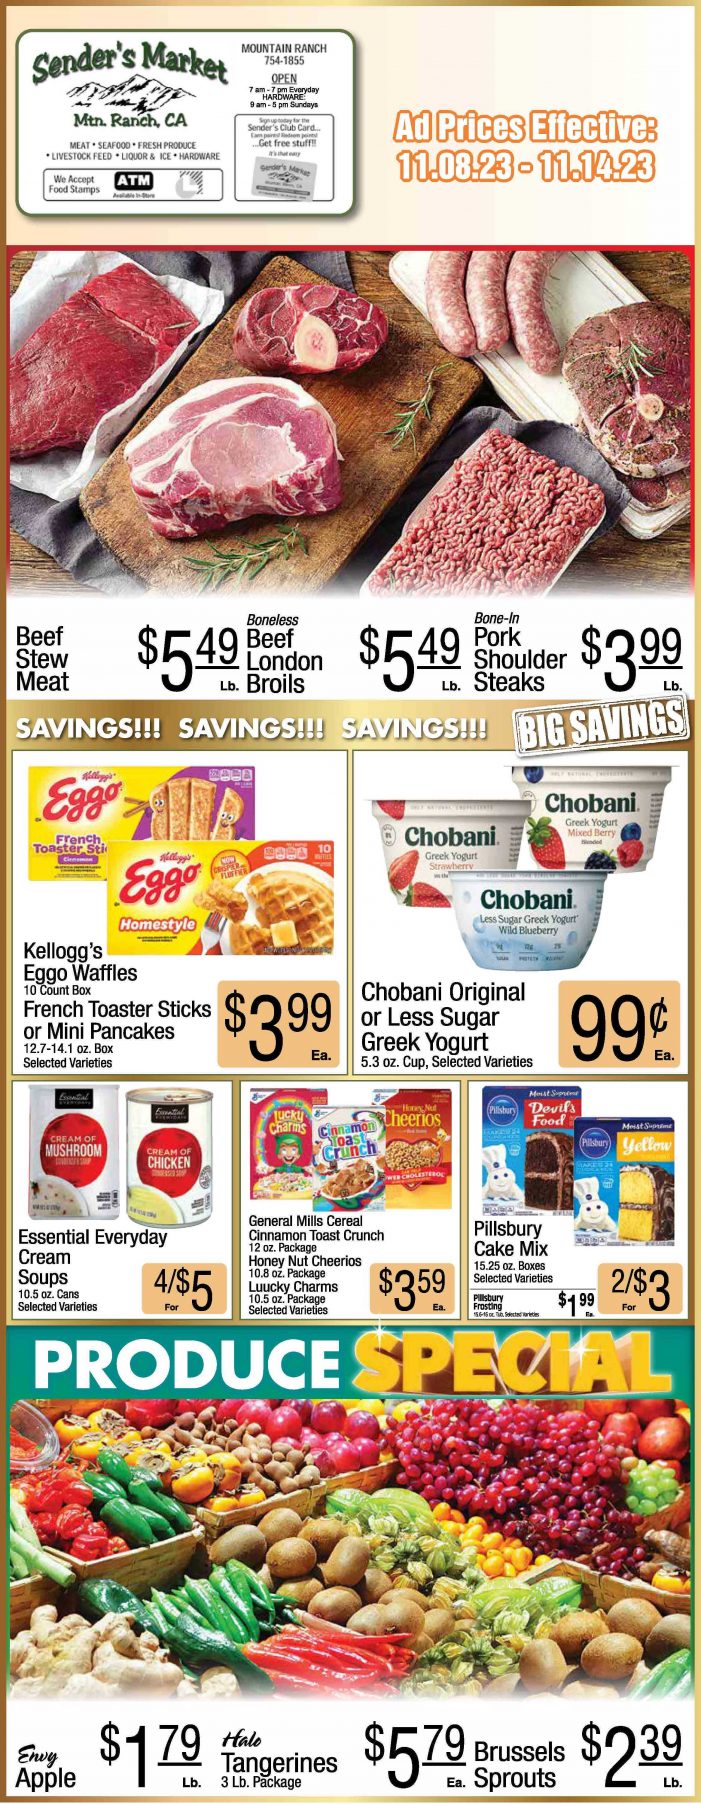 Sender’s Market Weekly Ad & Grocery Specials Through November 14th! Shop Local & Save!!